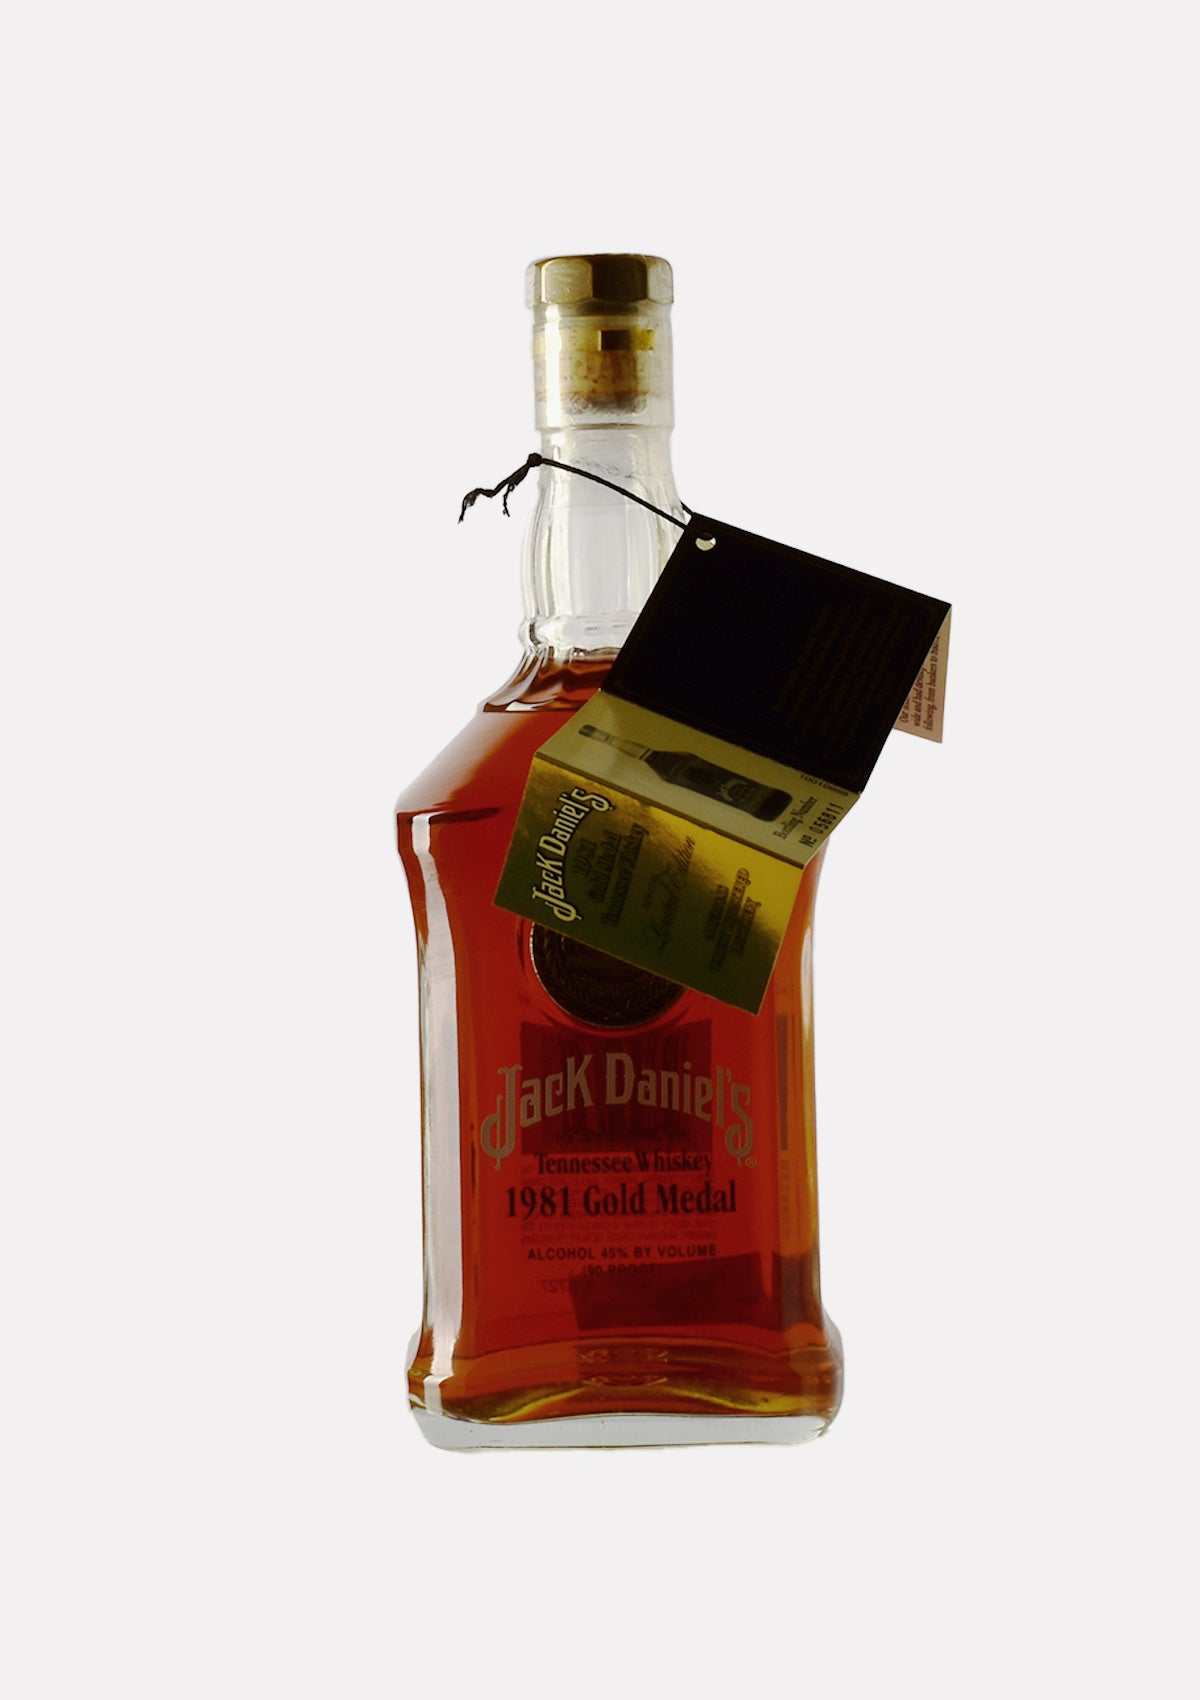 Jack Daniel`s Tennessee Whiskey 1981 Gold Medal